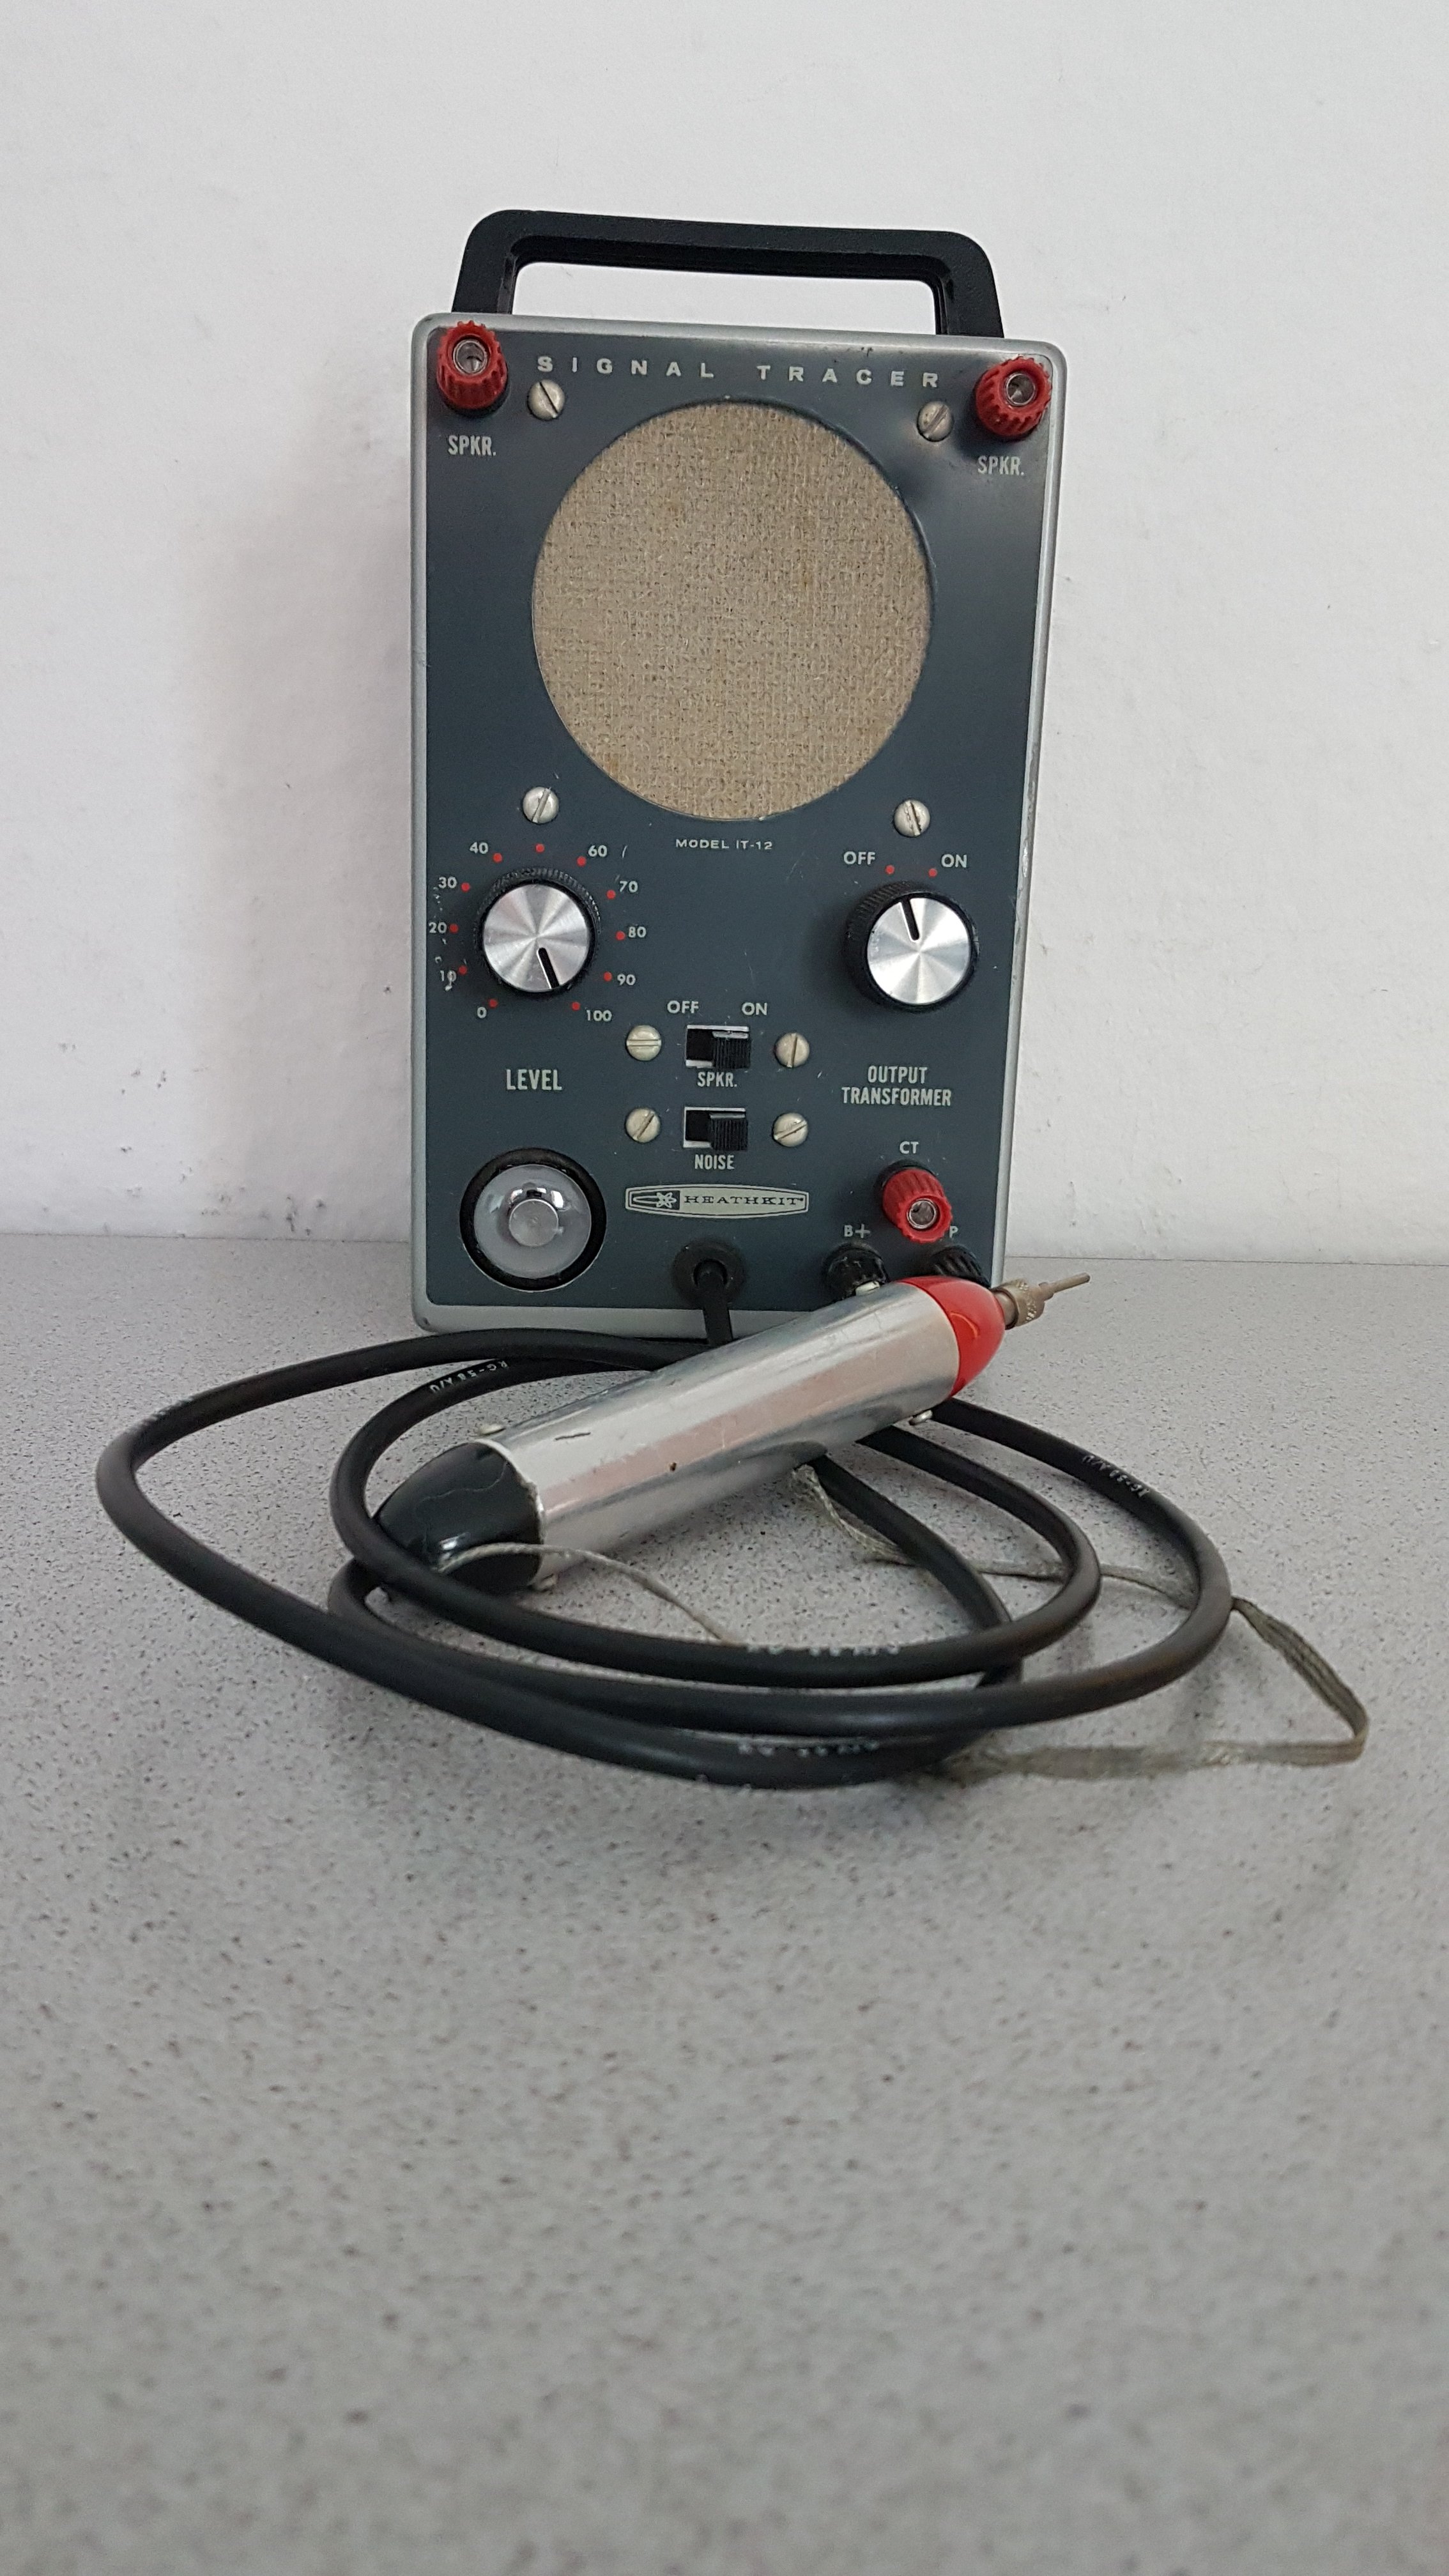 HEATHKIT Signal Tracer IT-12 (museum comp:ex CC BY-NC-SA)